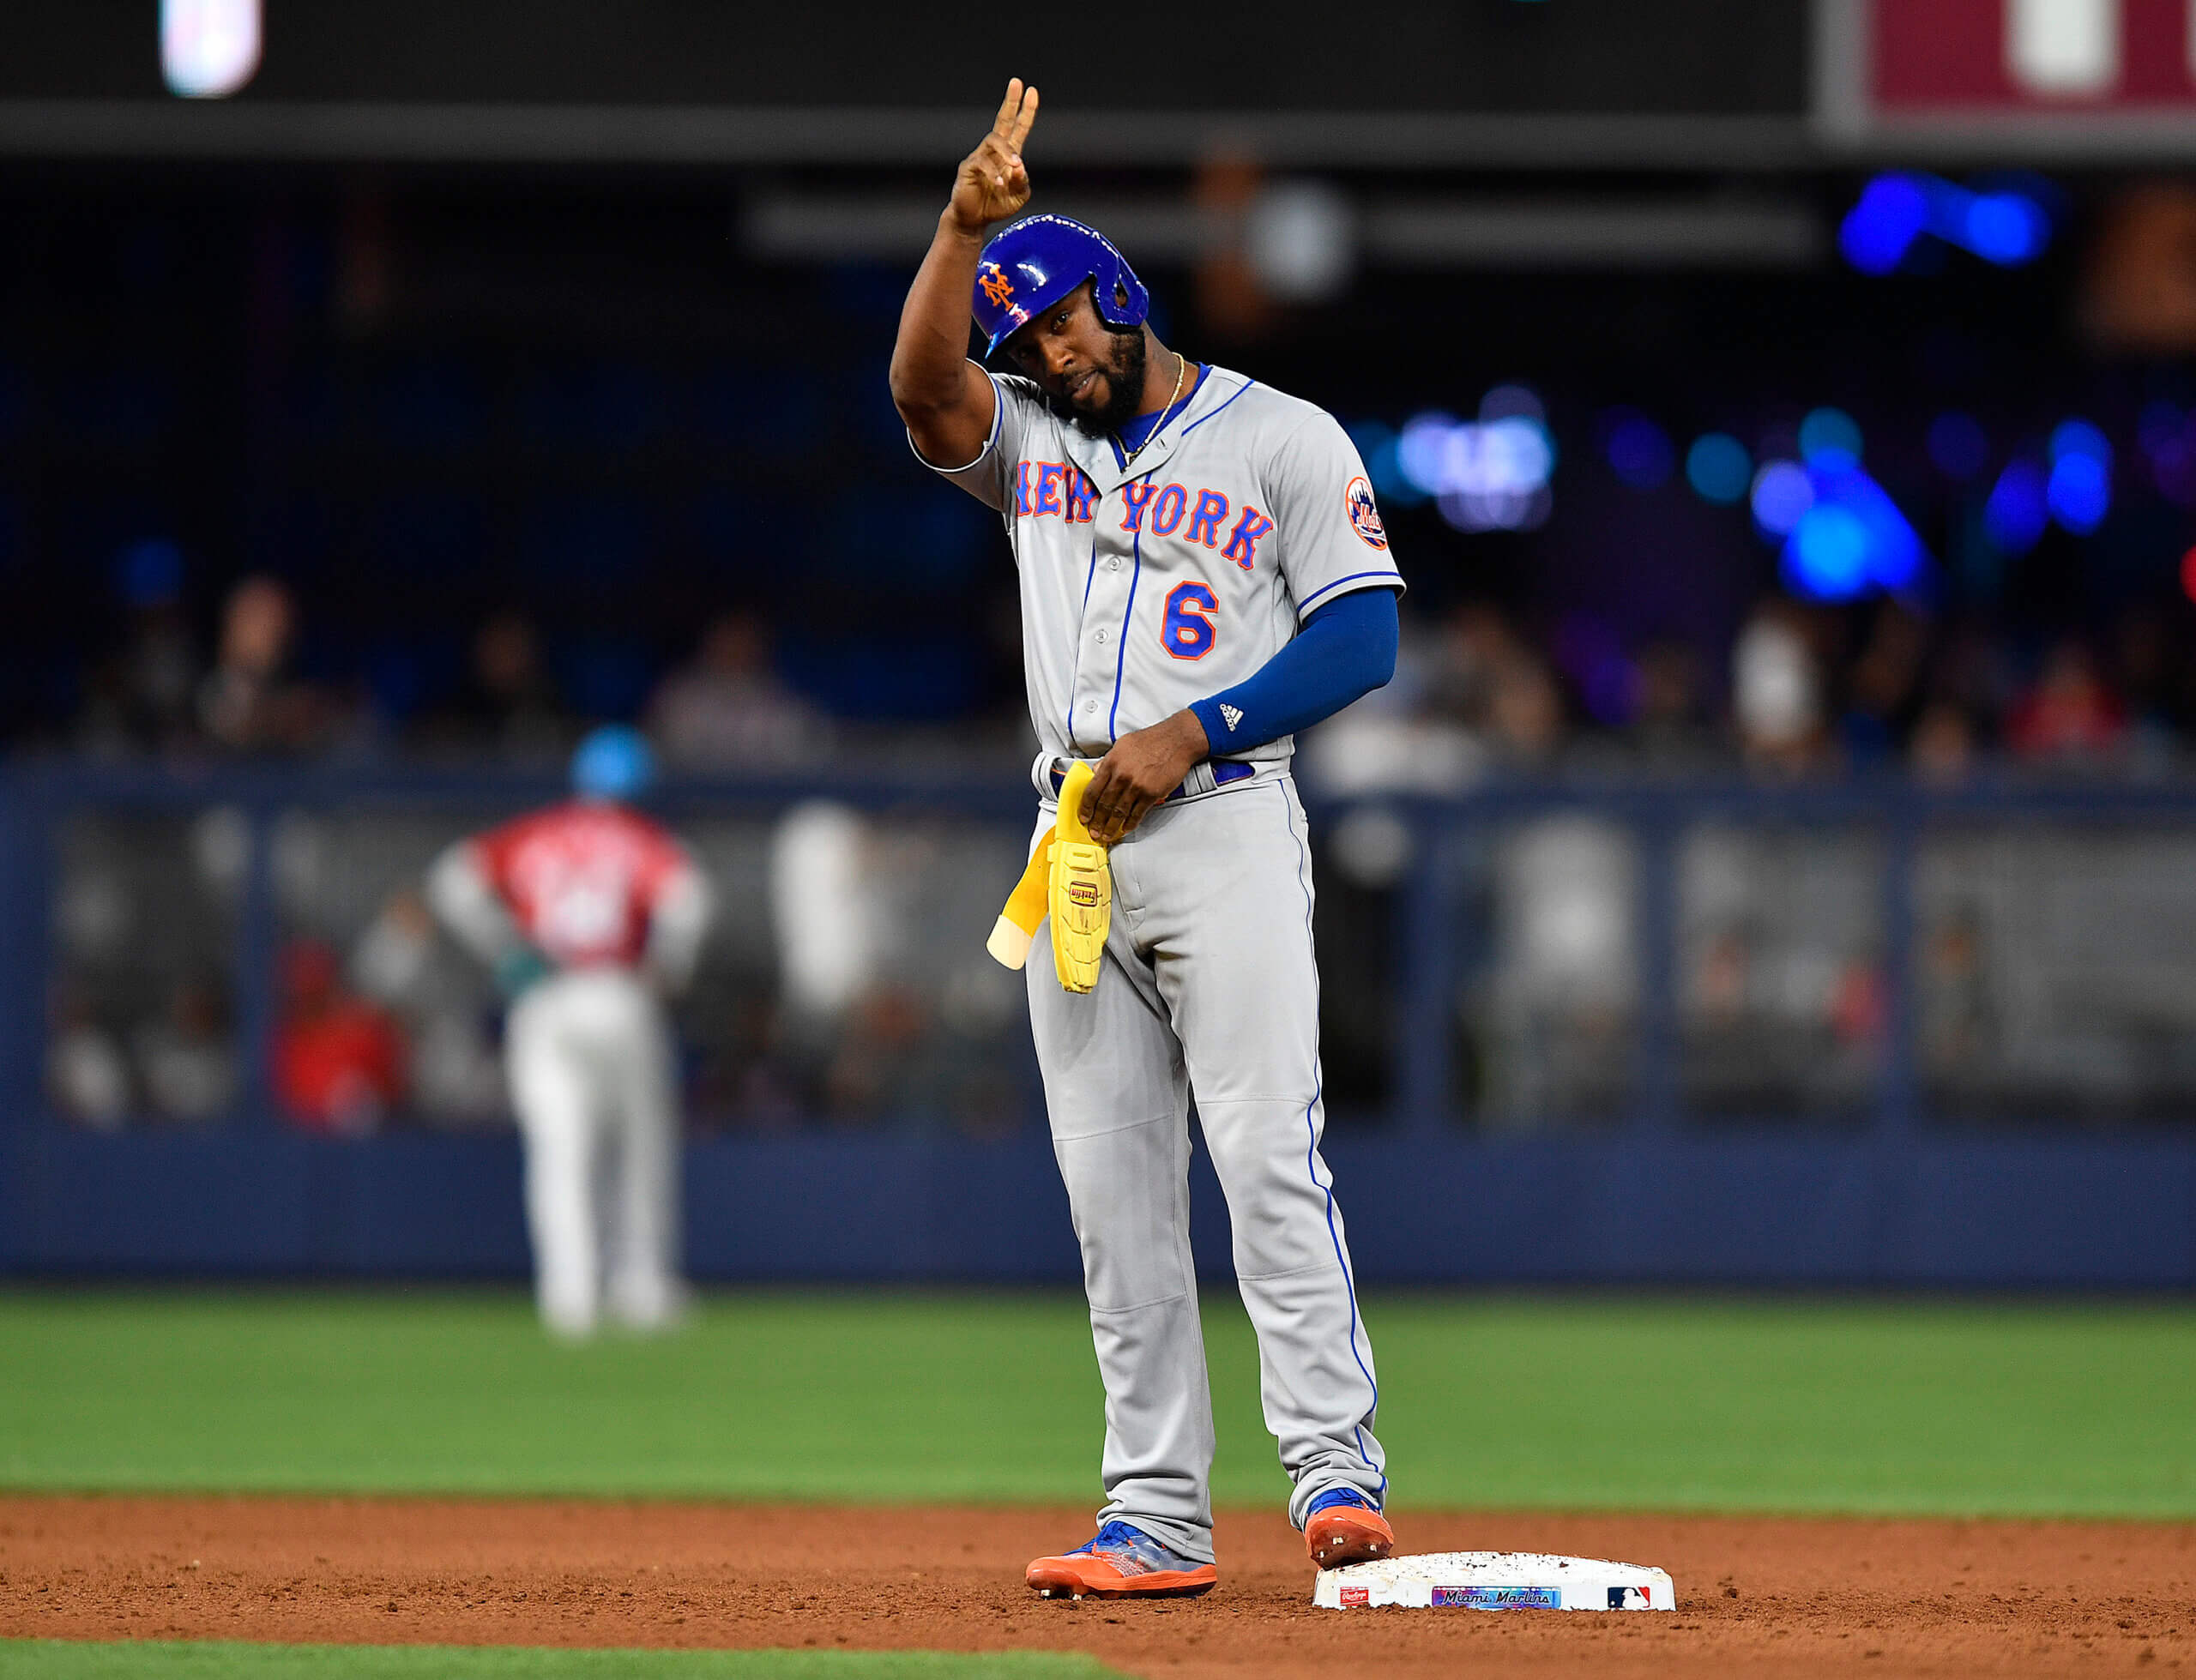 Starling Marte scratched from Mets' lineup Tuesday vs. White Sox